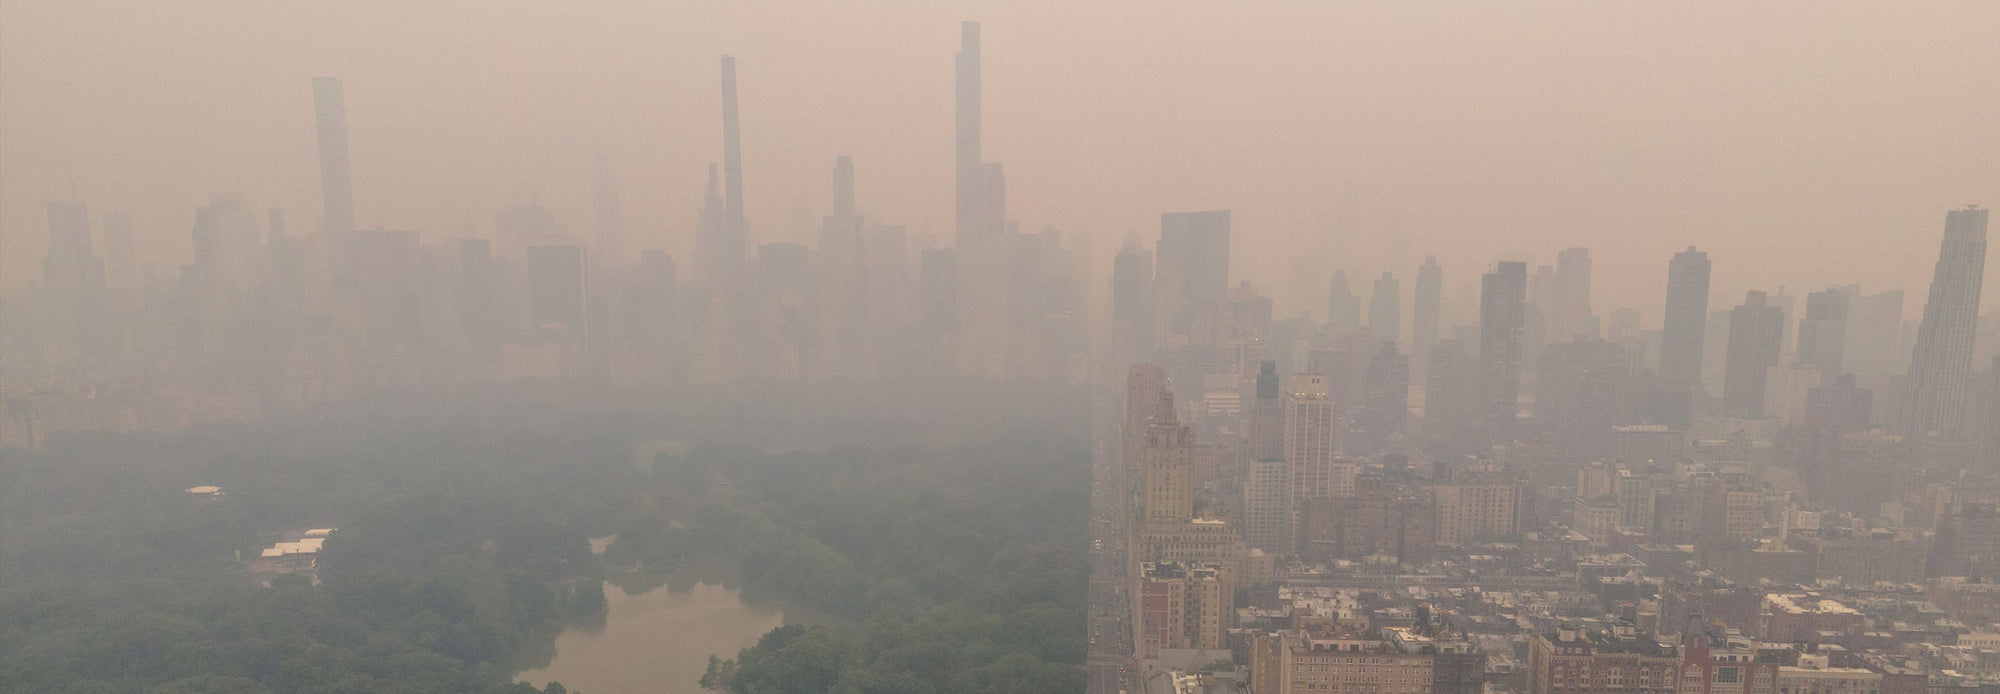 Poor air quality over New York City.